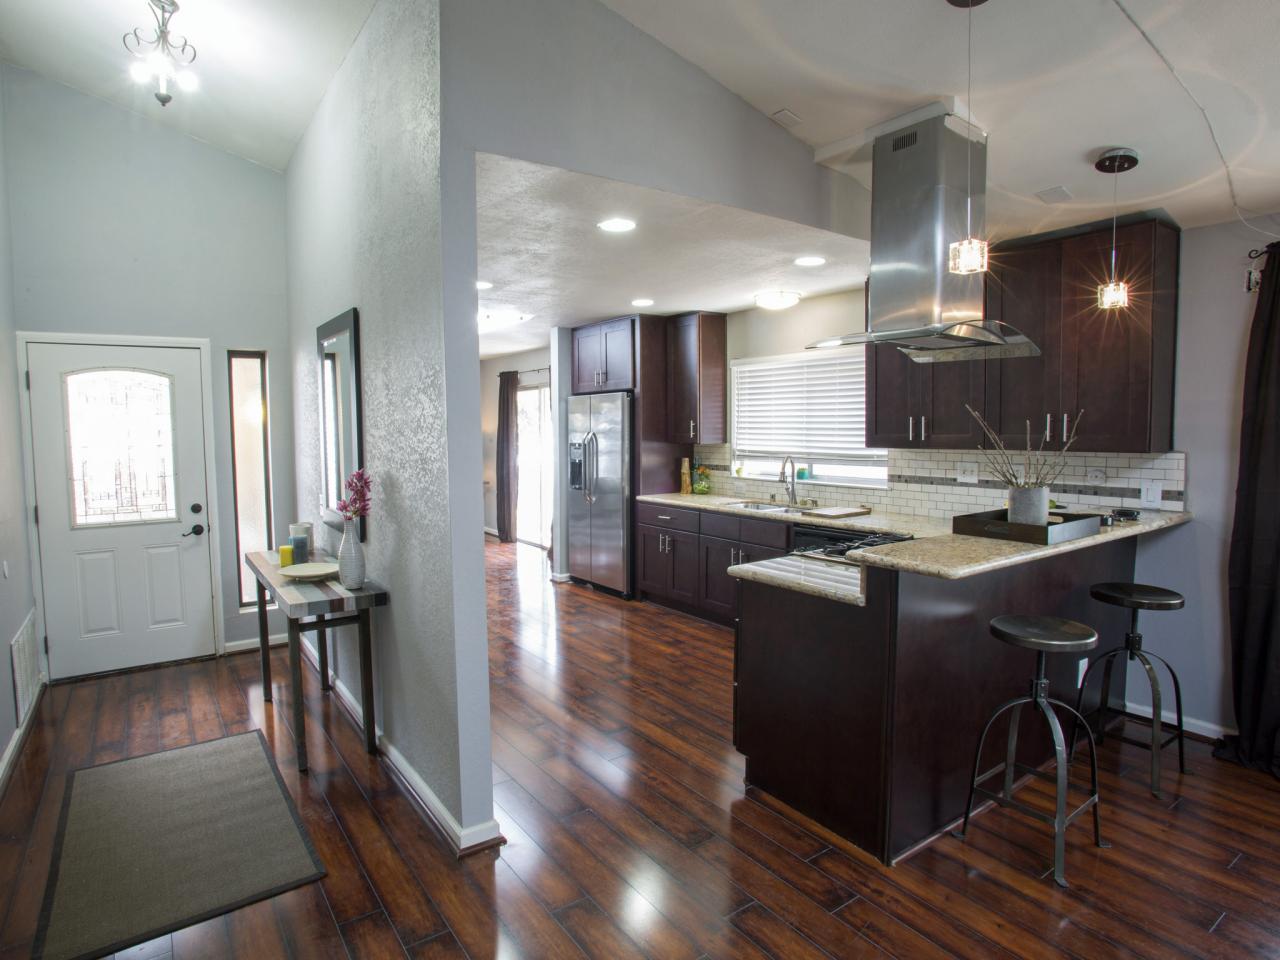 The Pros And Cons Of Laminate Flooring, How To Lay New Flooring In Kitchen